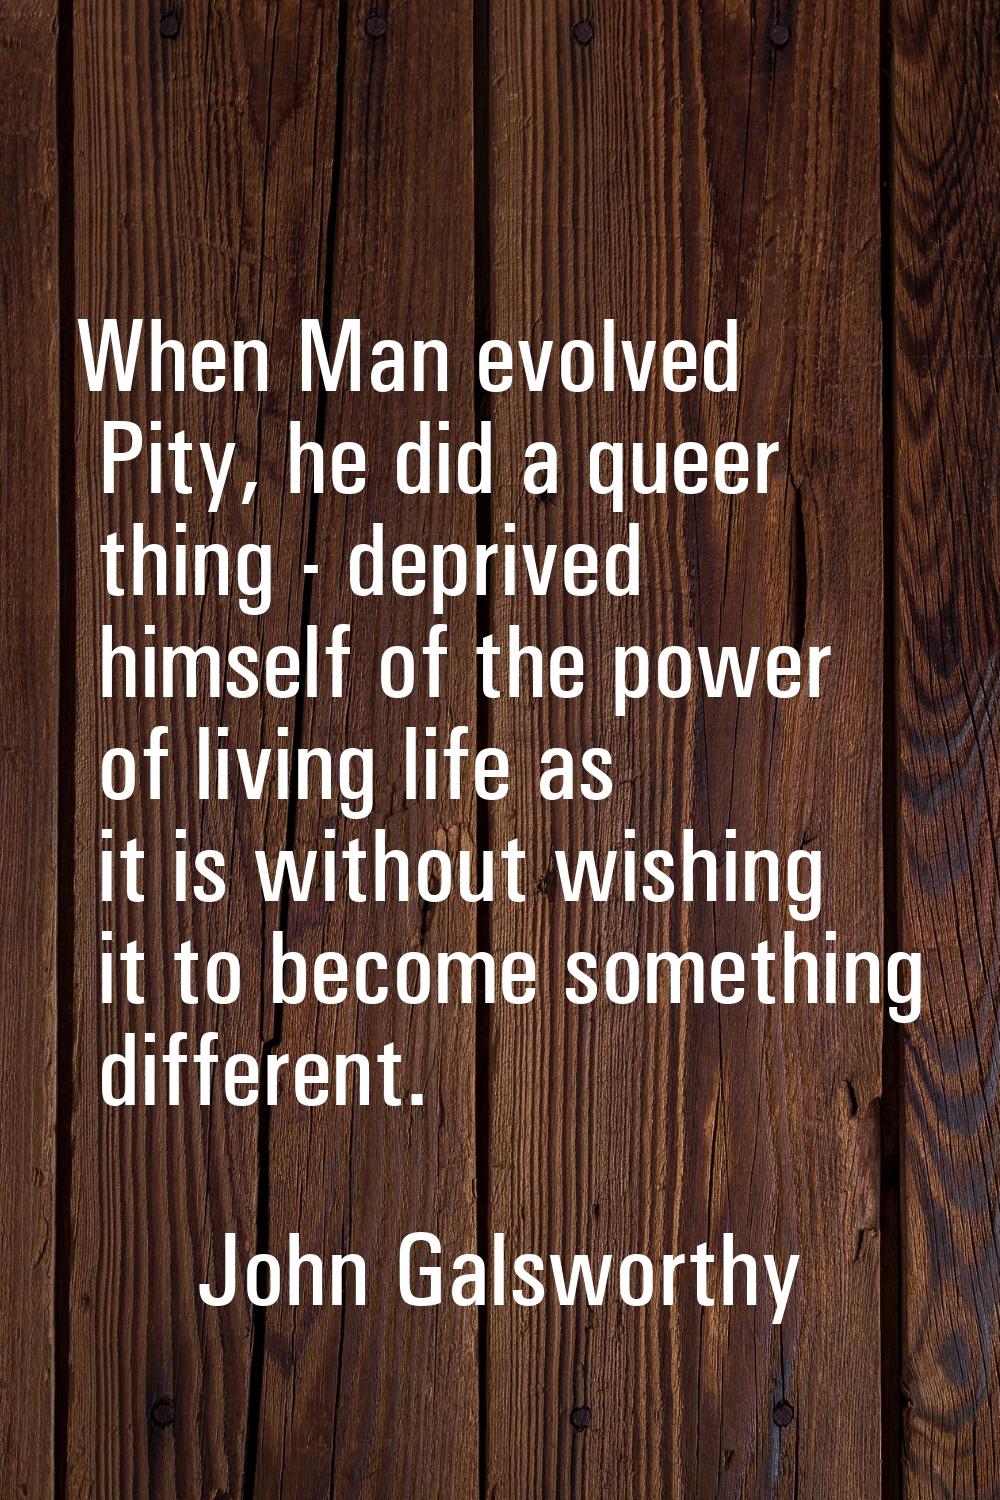 When Man evolved Pity, he did a queer thing - deprived himself of the power of living life as it is